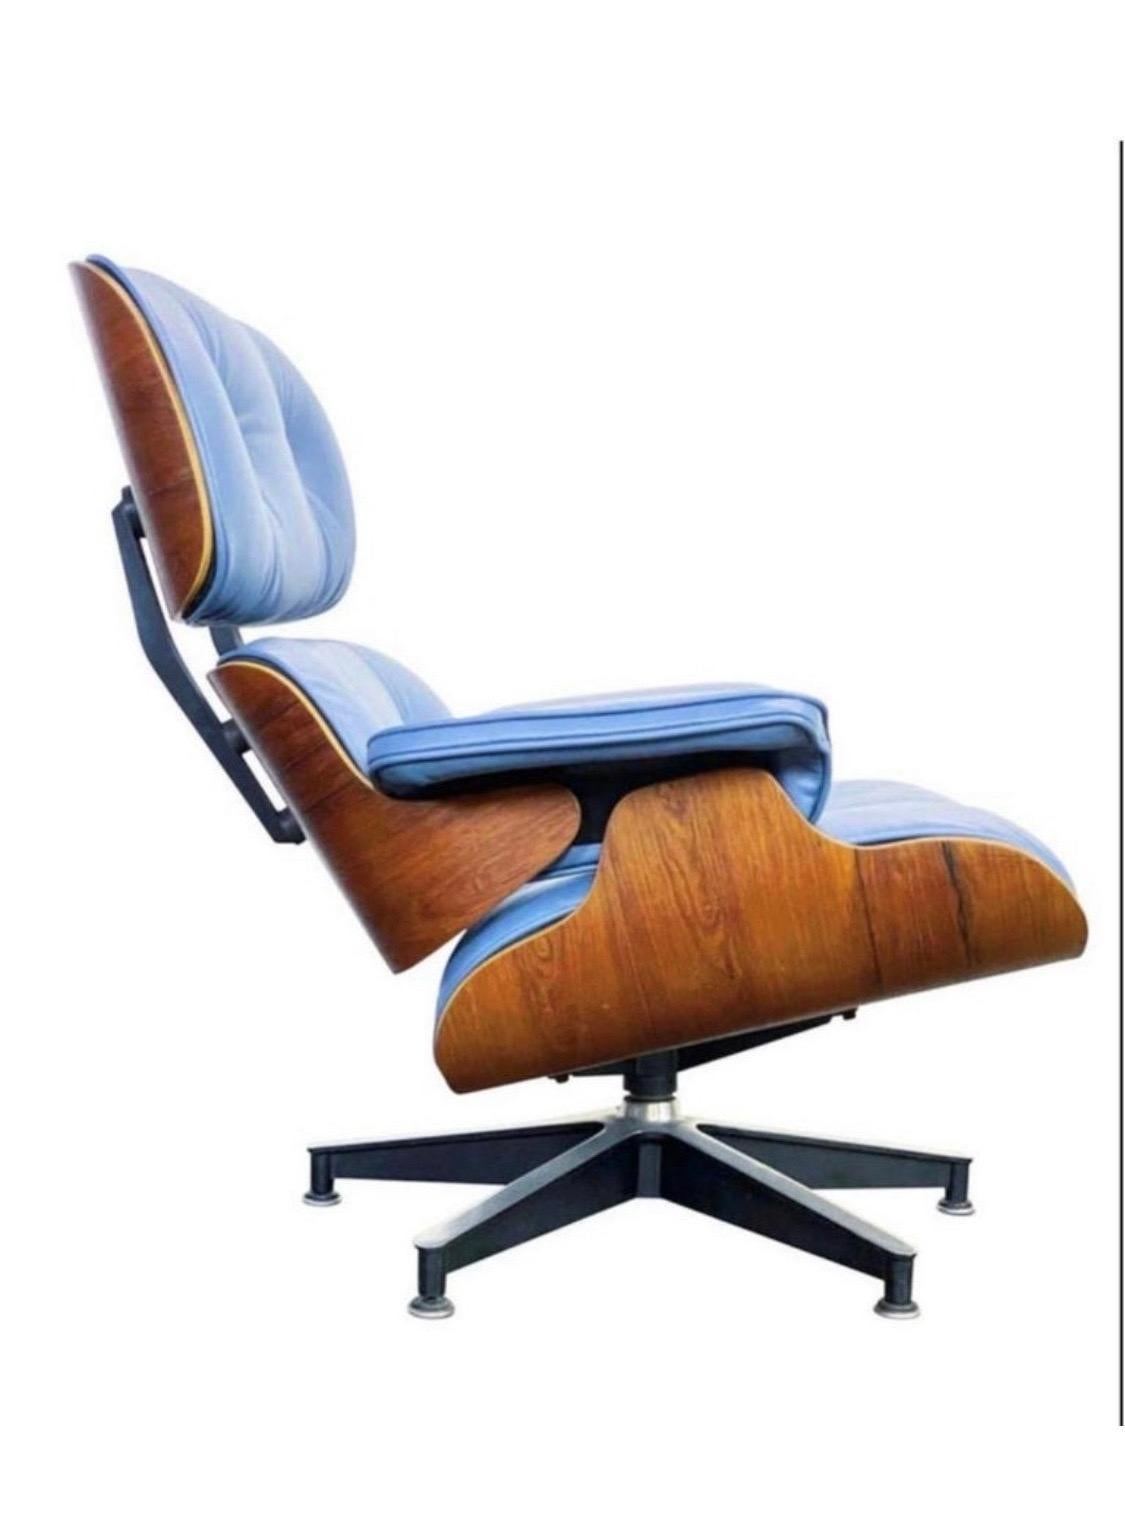 20th Century Restored Herman Miller Eames Lounge Chair with Custom Blue Leather For Sale